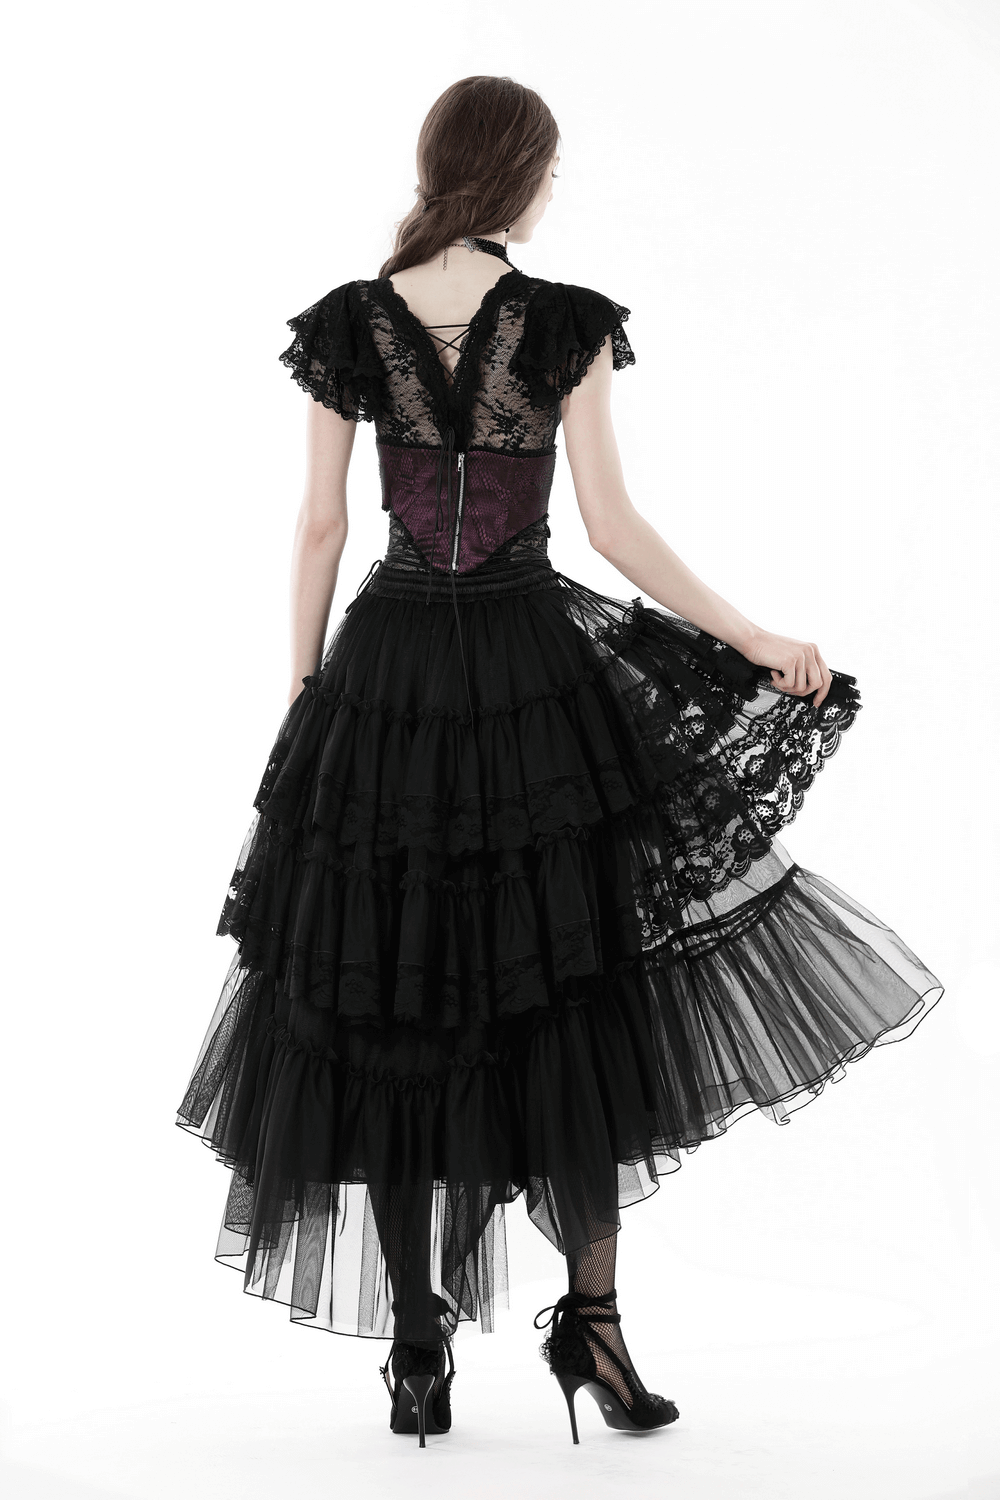 Women's Mesh Gothic Skirt with Lace and Dramatic Ruffles